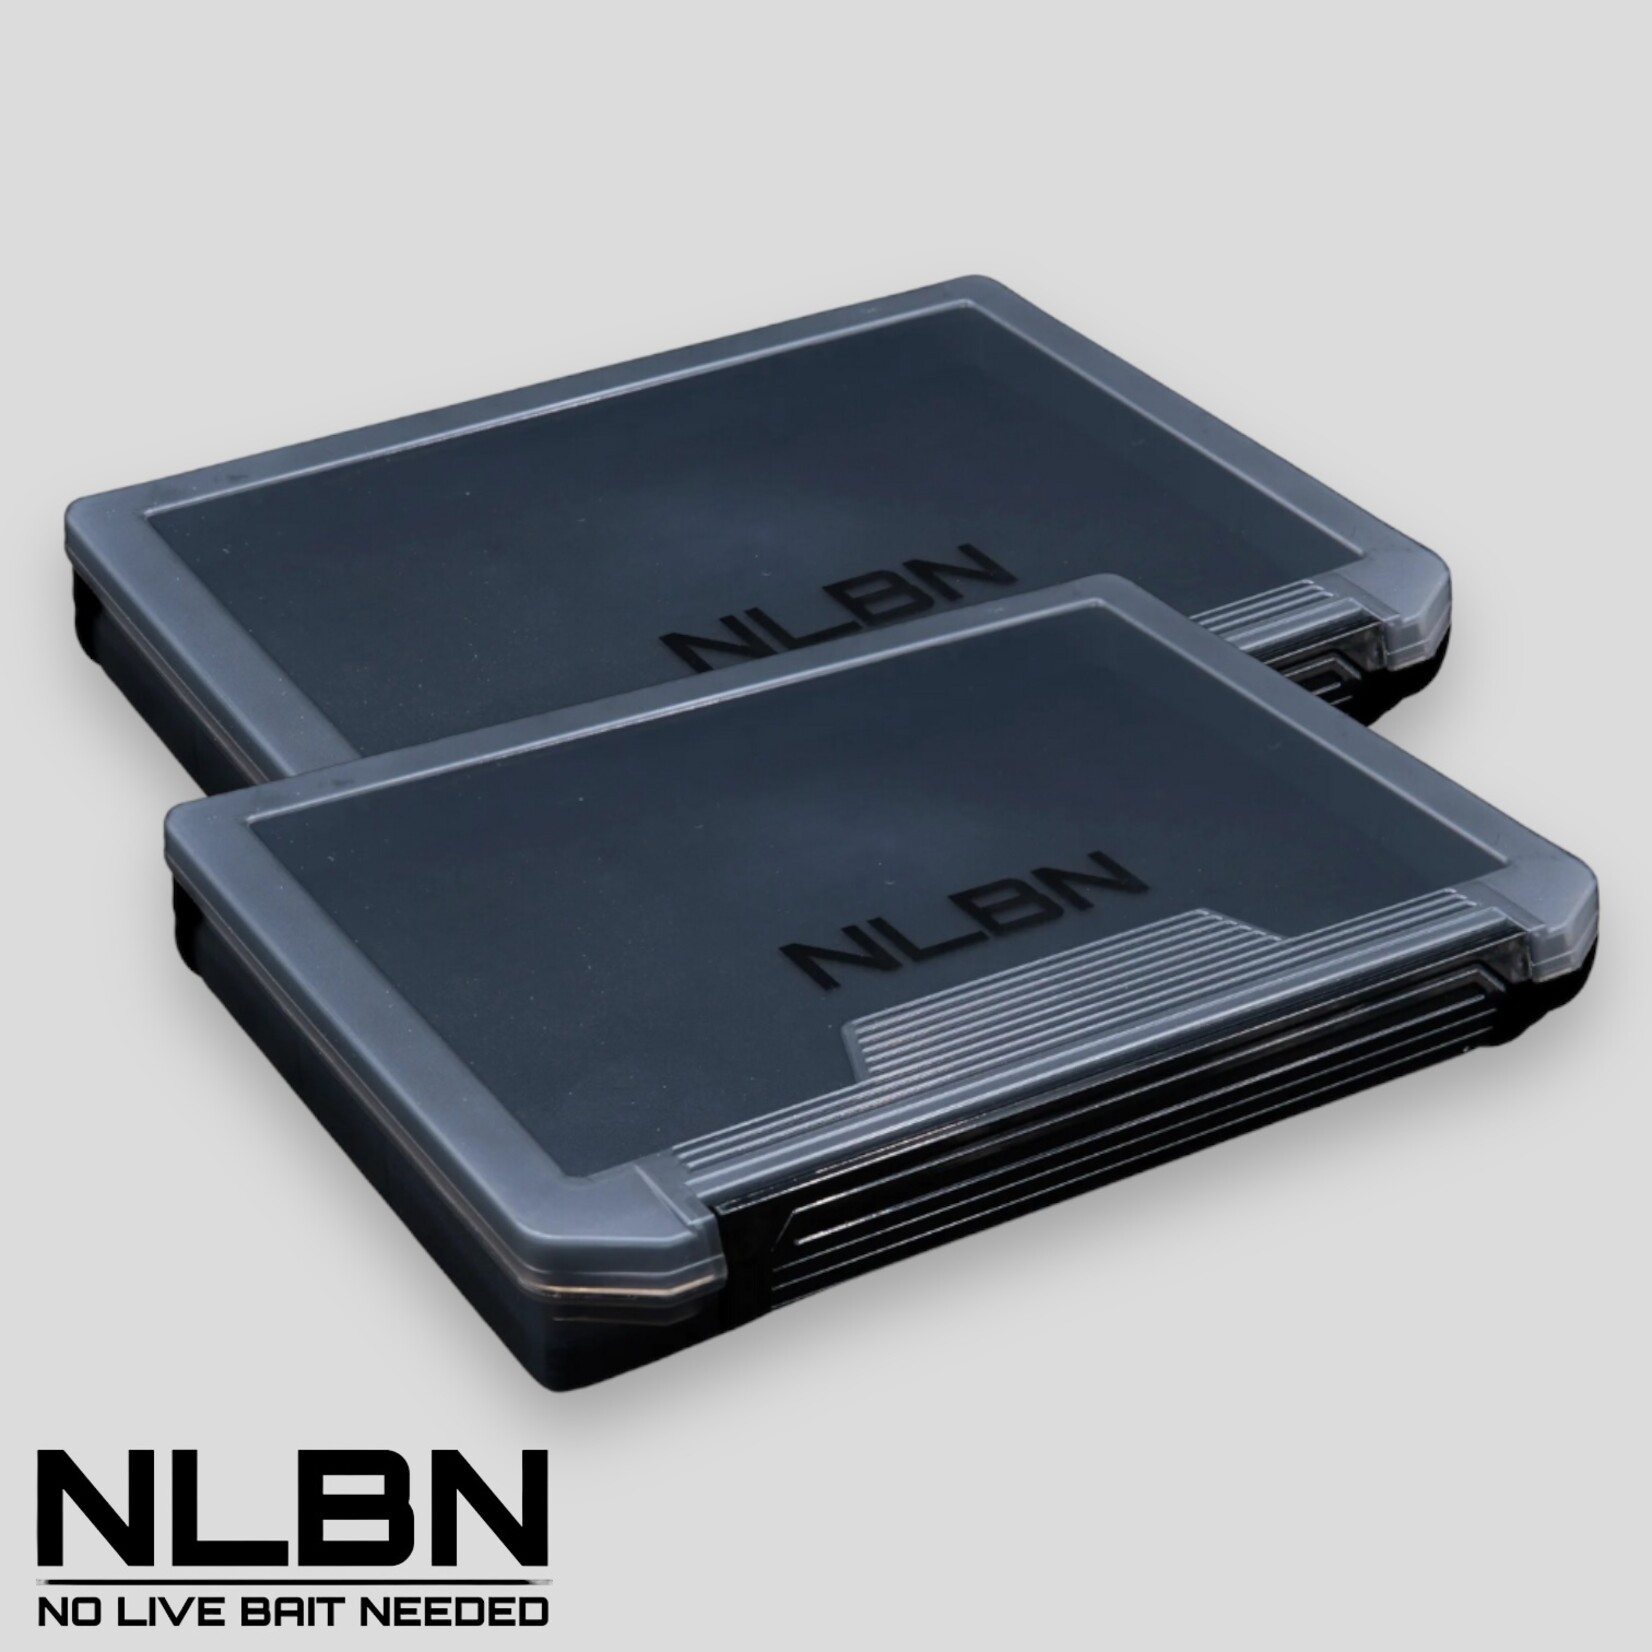 No Live Bait Needed NLBN Jig Boxes